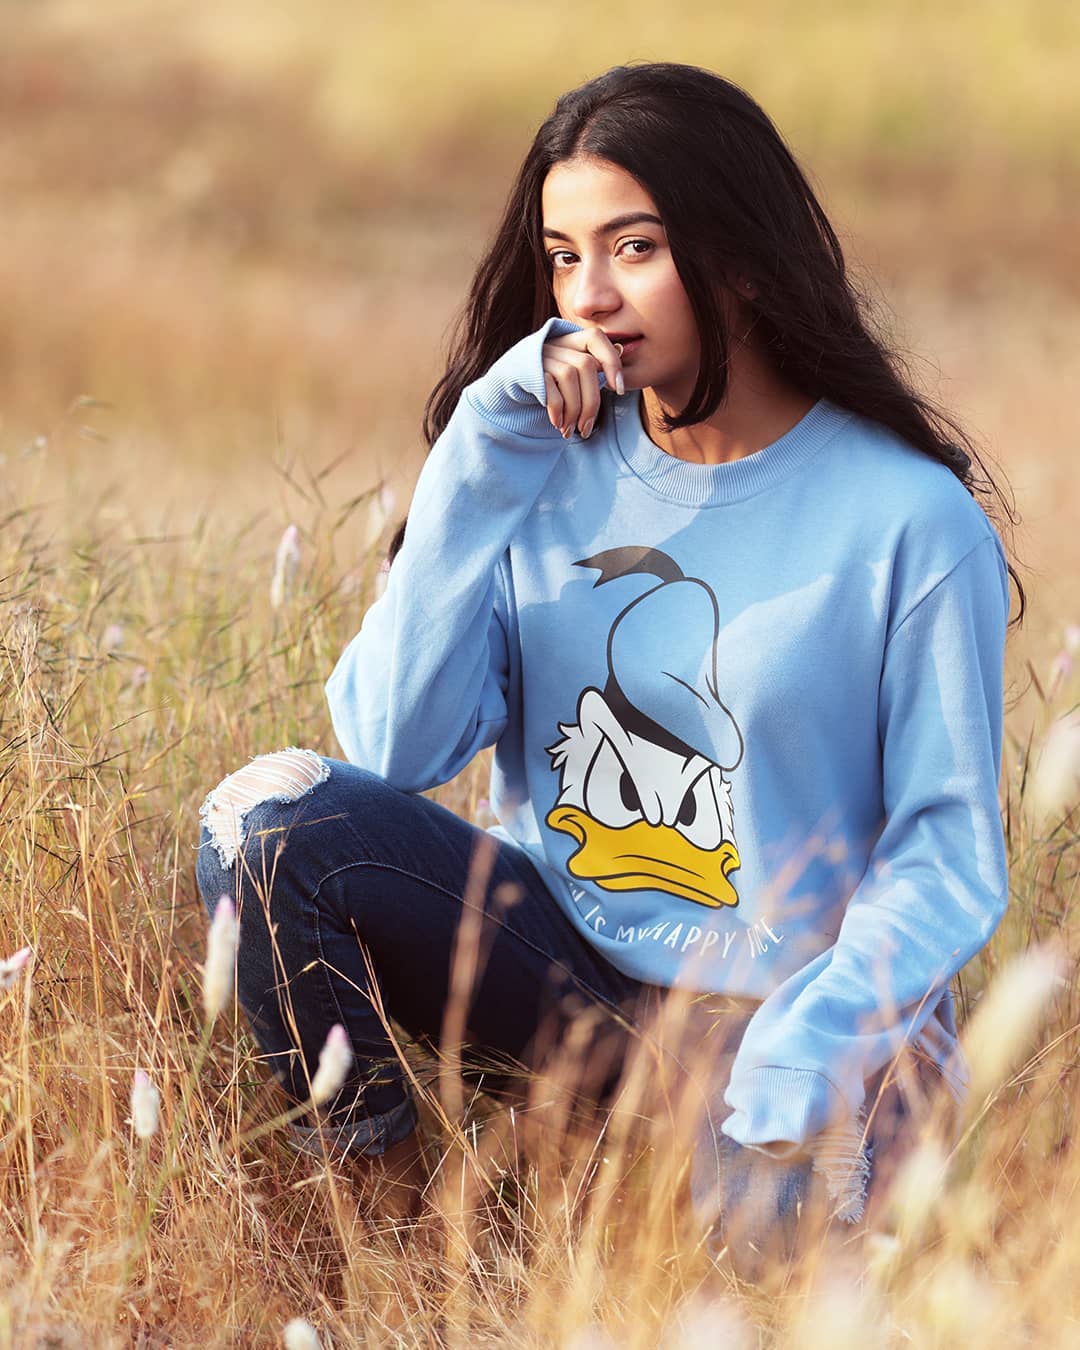 The Souled Store - Quack up your style. 

#thesouledstore #instastyle #instafashion #lookbook #outfits #ootd #trending #fashiongoals #fashionstyle #express #celebratefandom #donaldduck #cartoon #style...